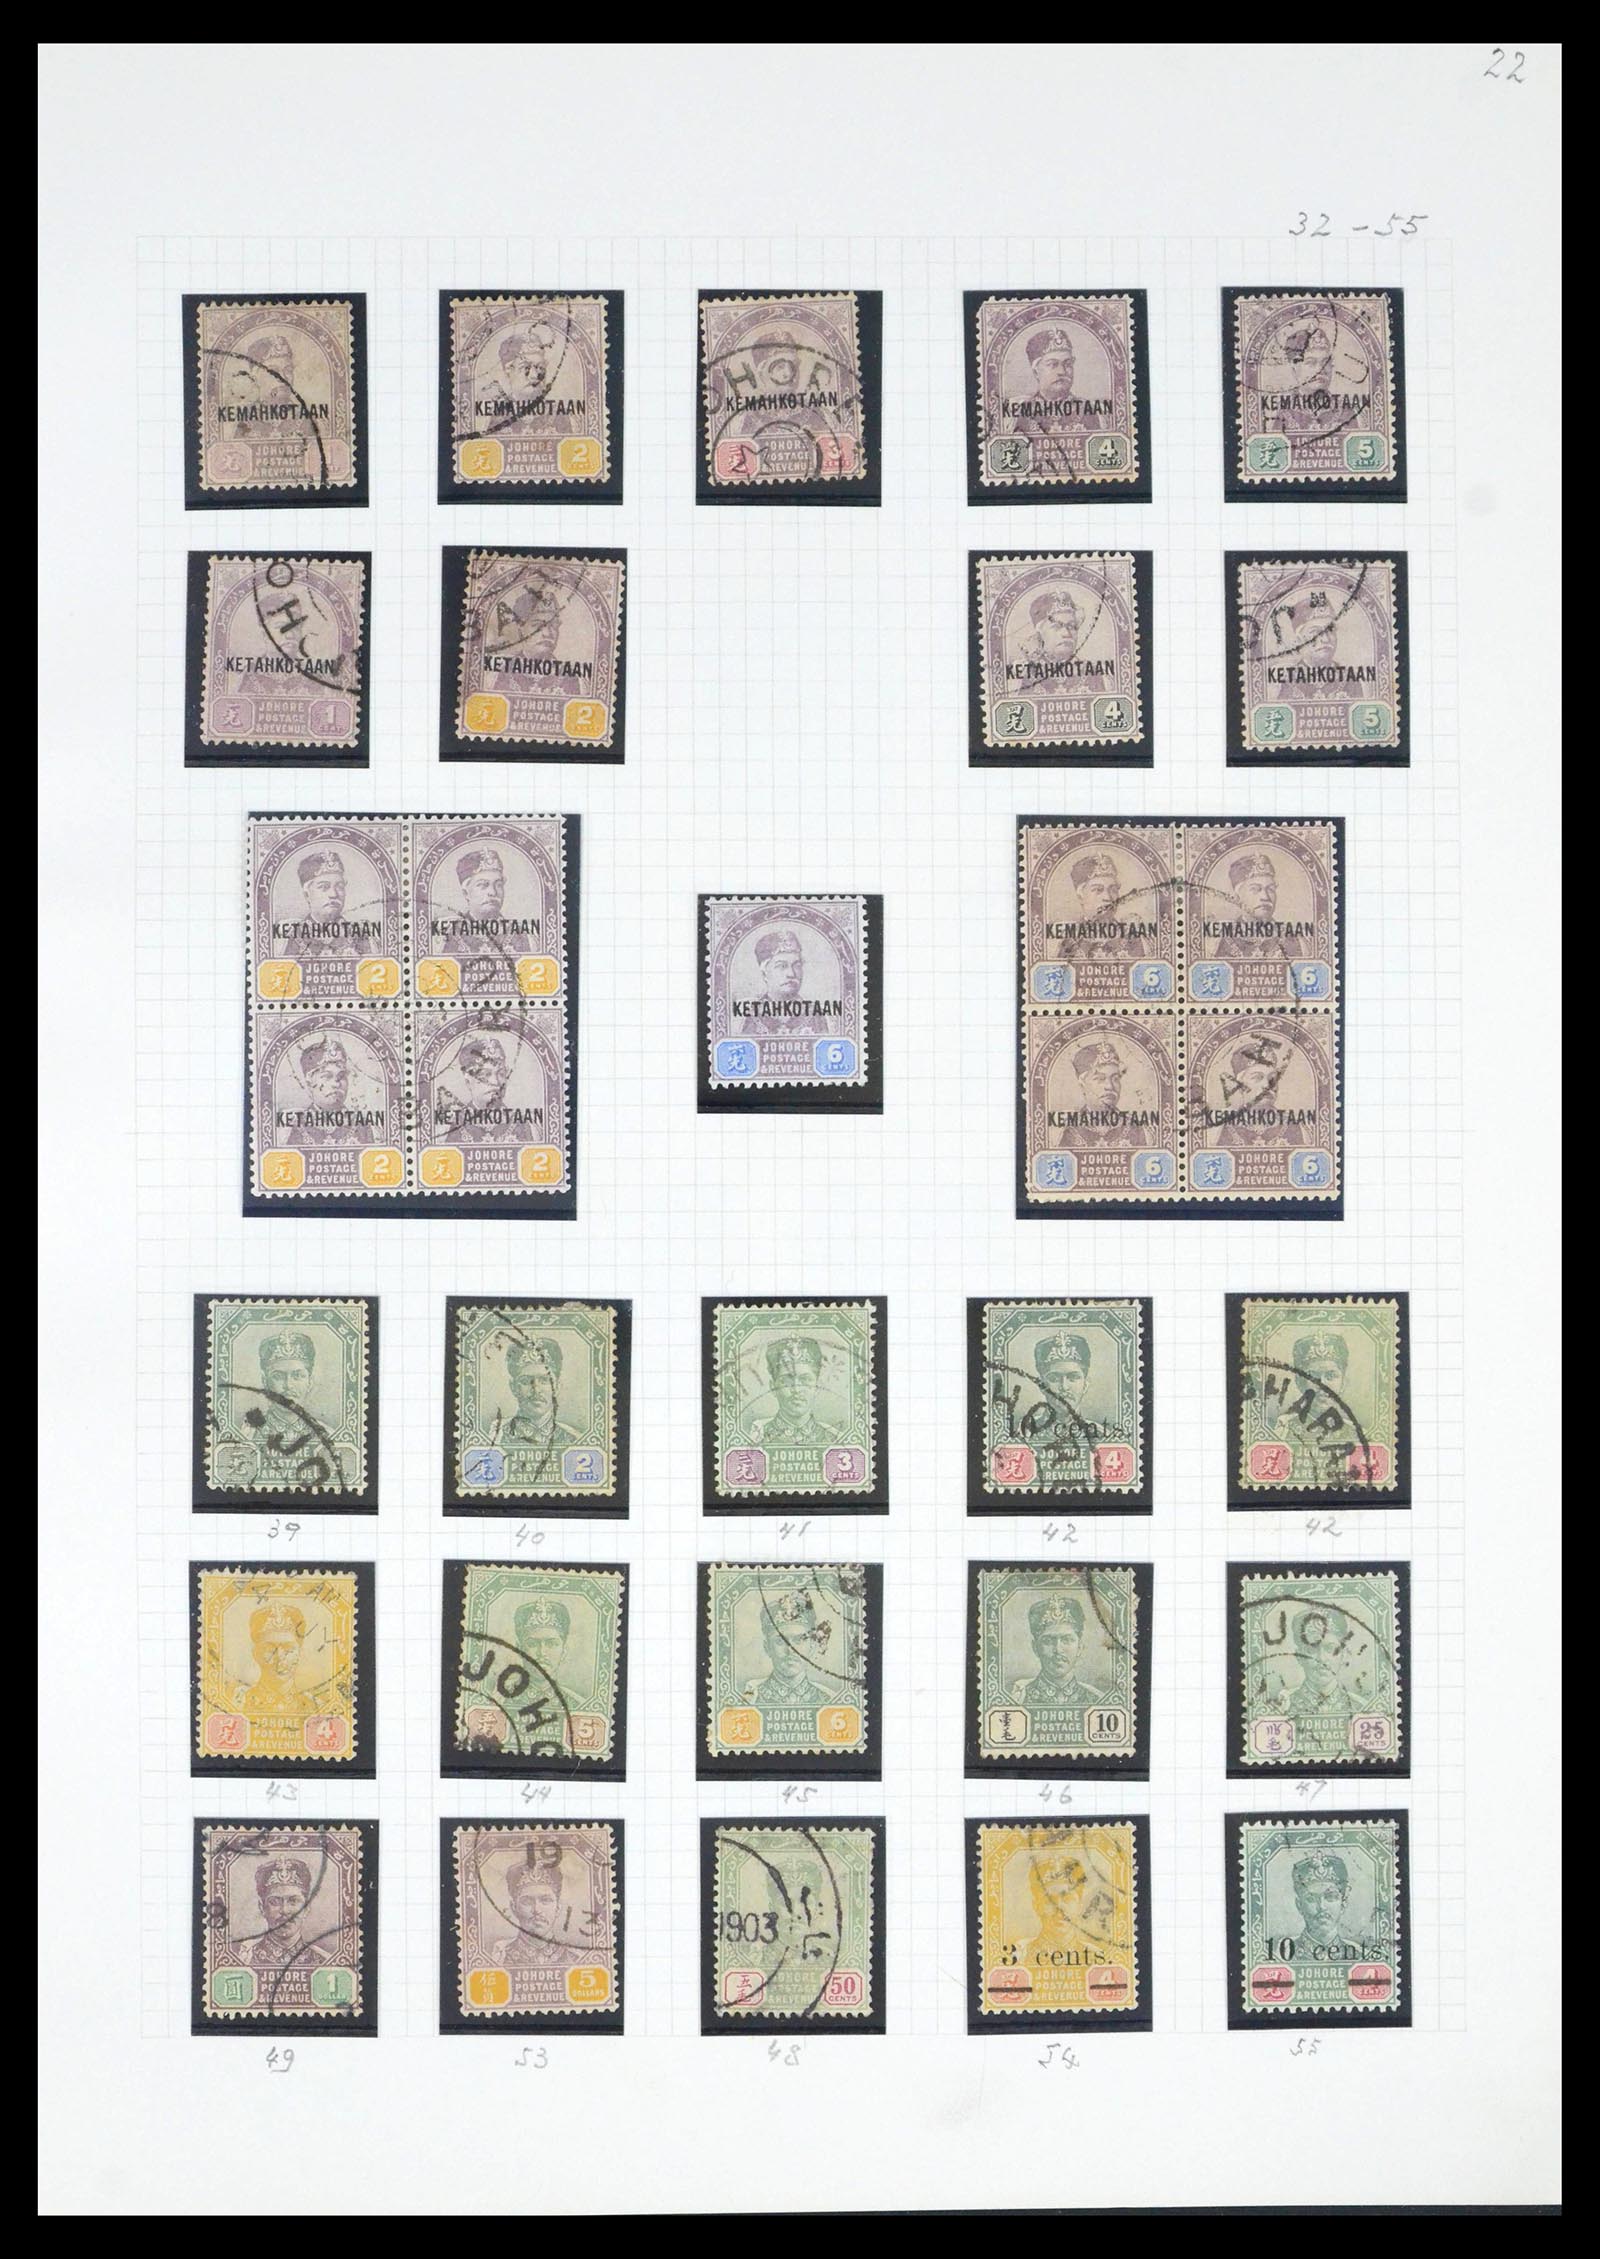 39470 0003 - Stamp collection 39470 Malayan States 1880-1965.